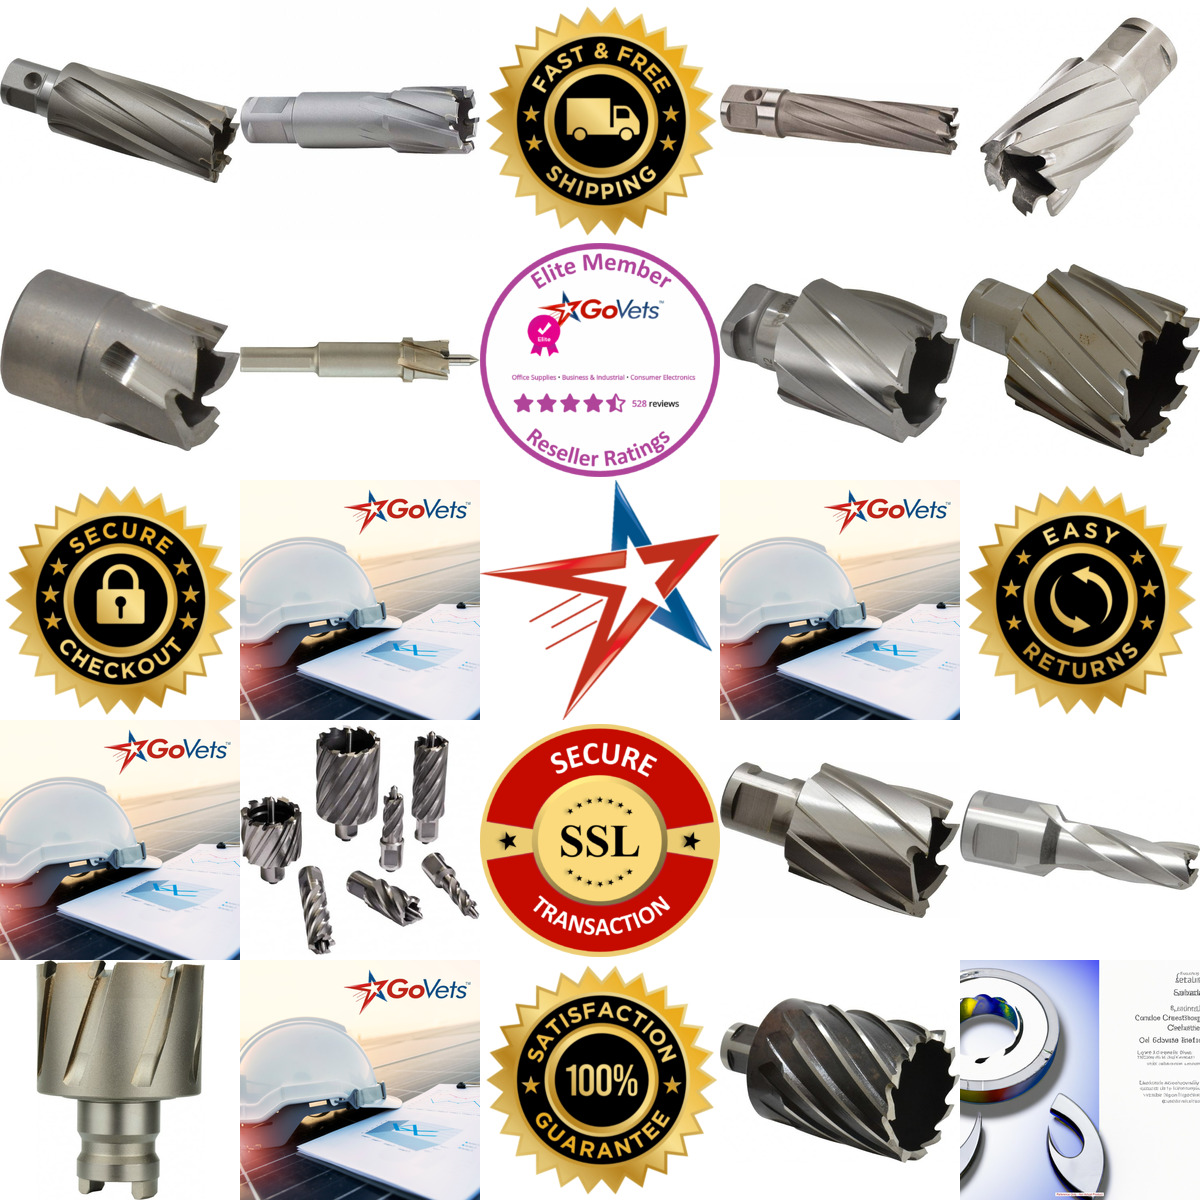 A selection of Hole Cutters products on GoVets